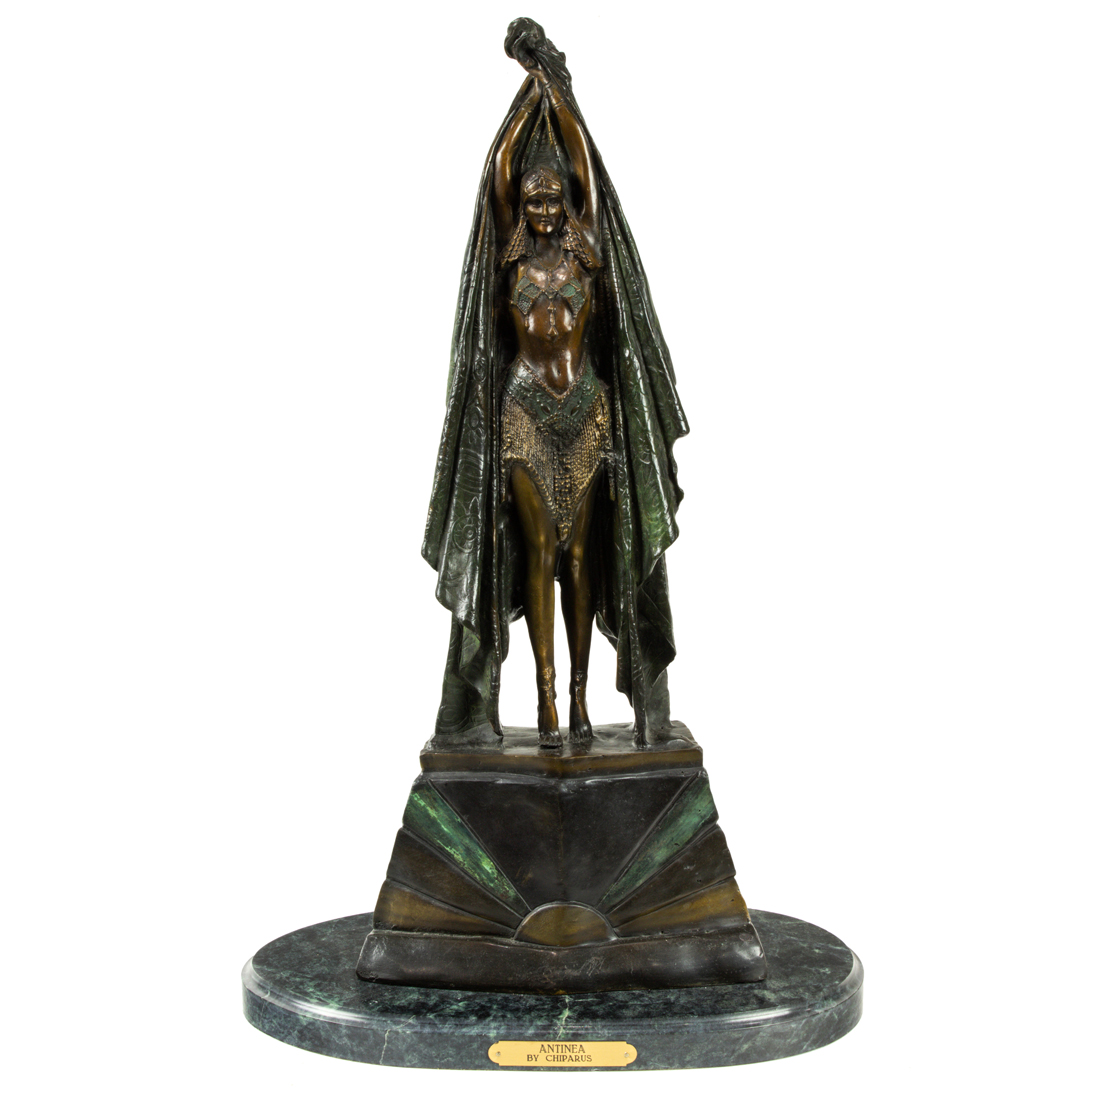 AN ART DECO STYLE PATINATED BRONZE 3a1925